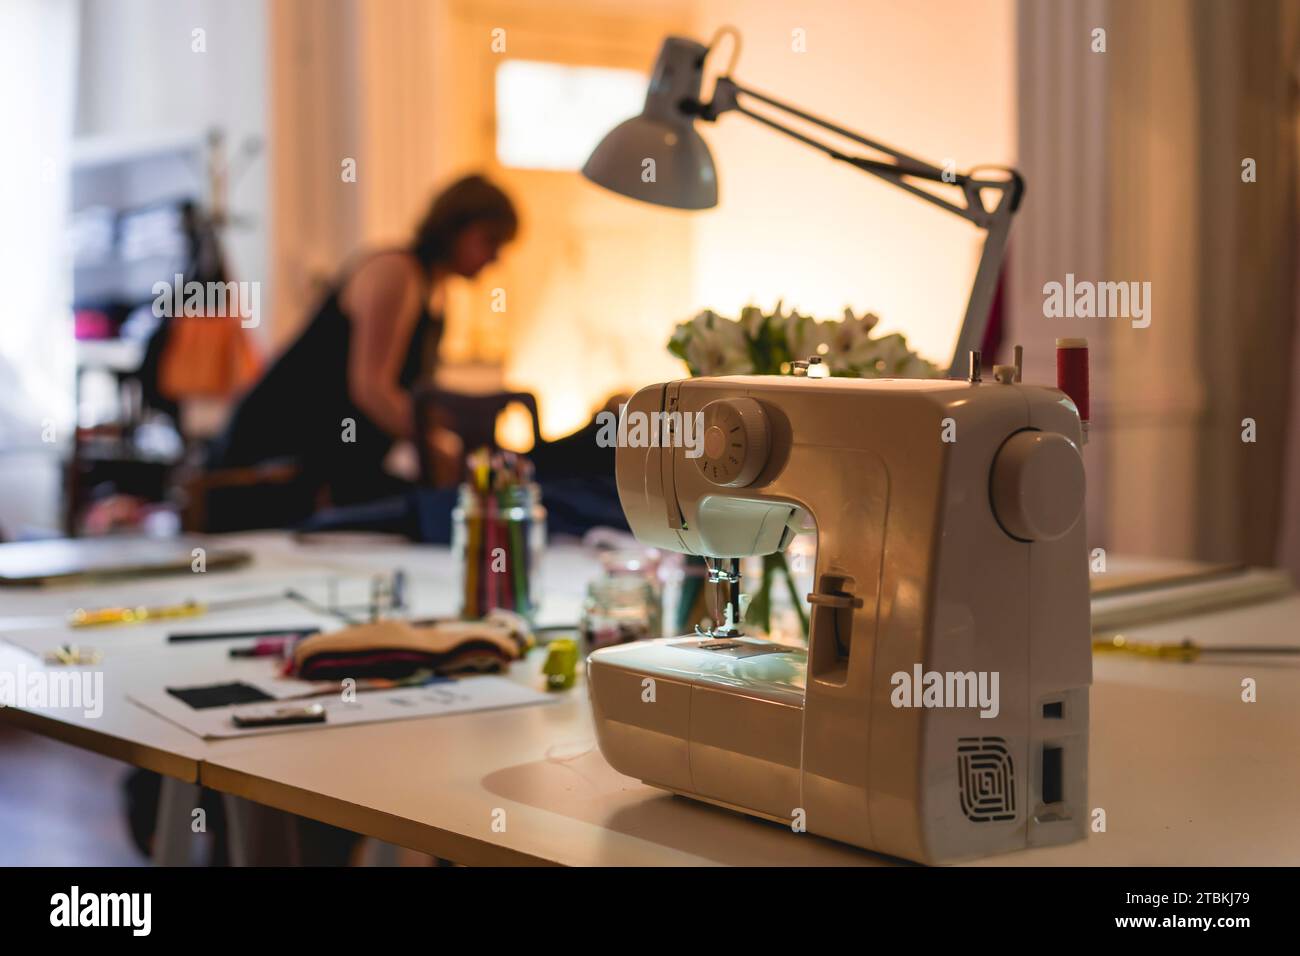 Modern sewing machine on table at fashion studio and showroom Stock Photo